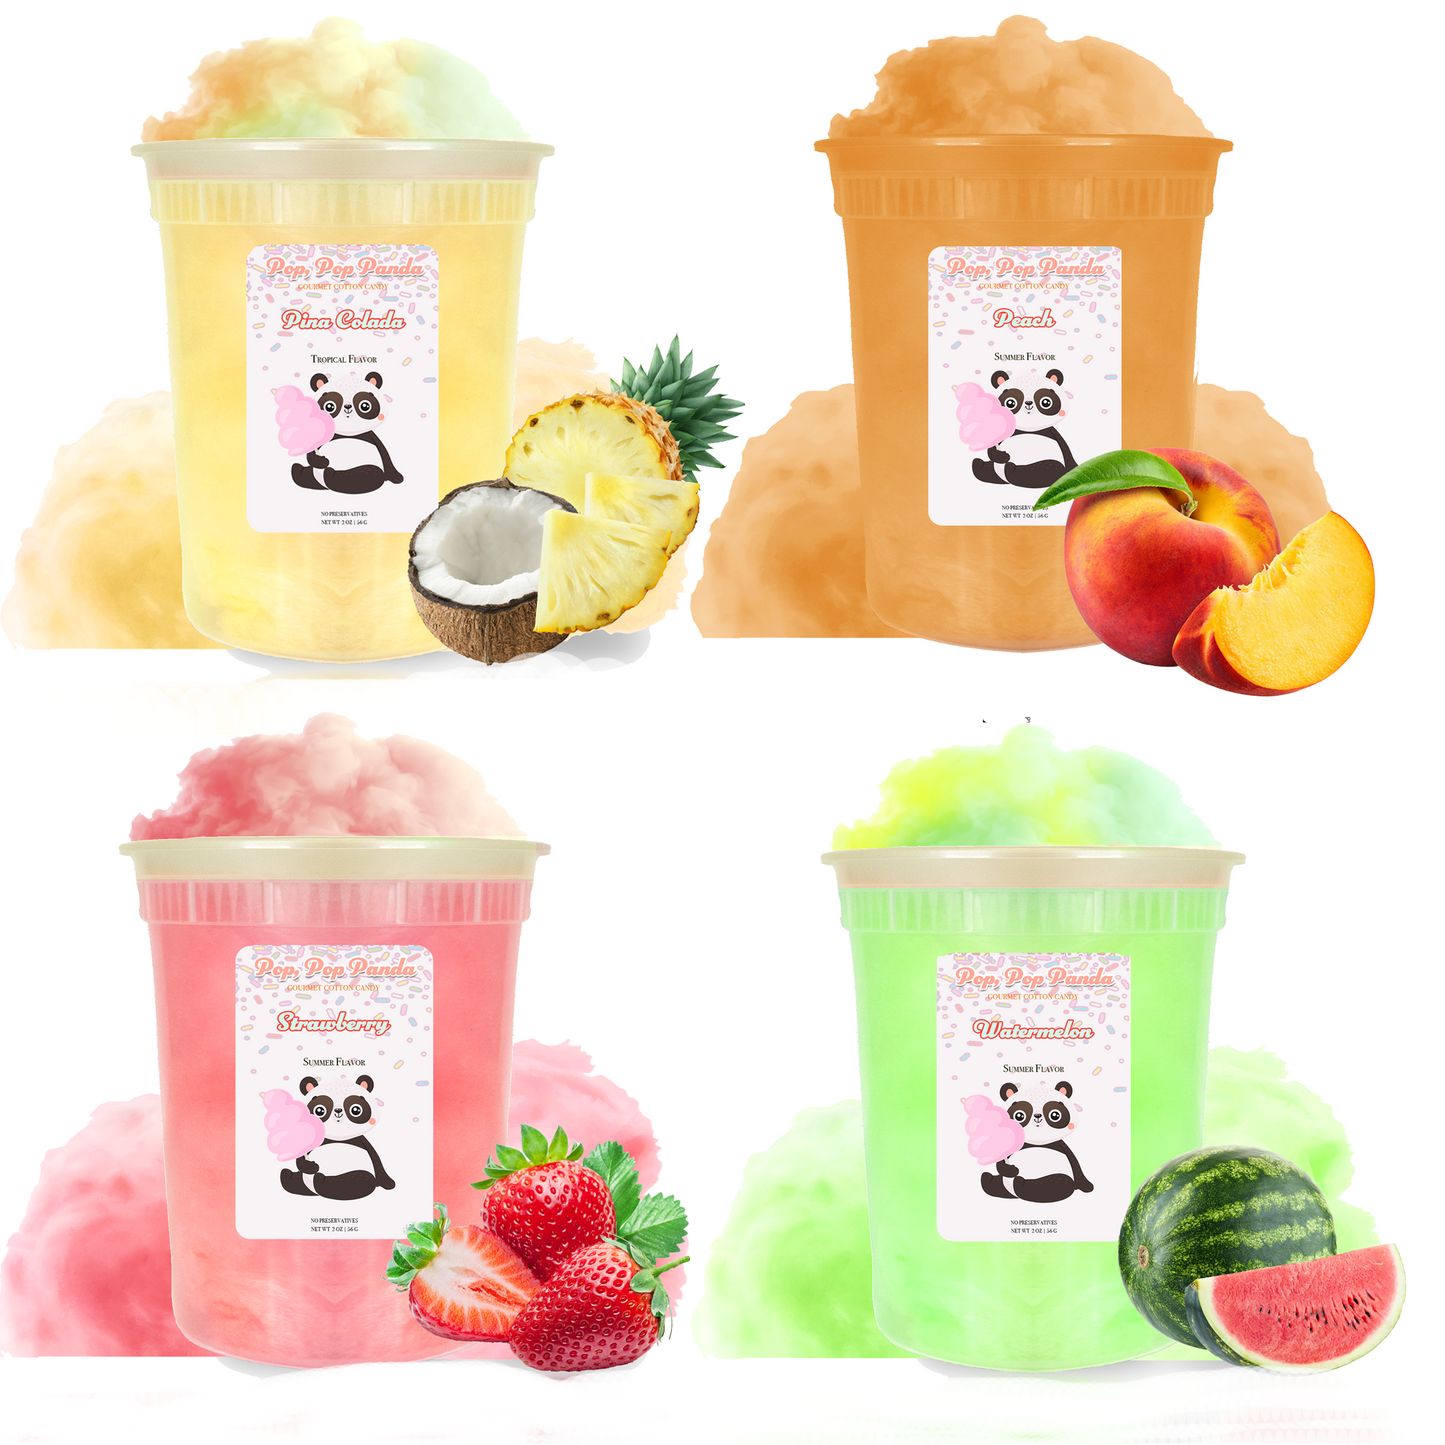 Summer Variety Pack - 4 Cotton Candy Tubs | 2 oz